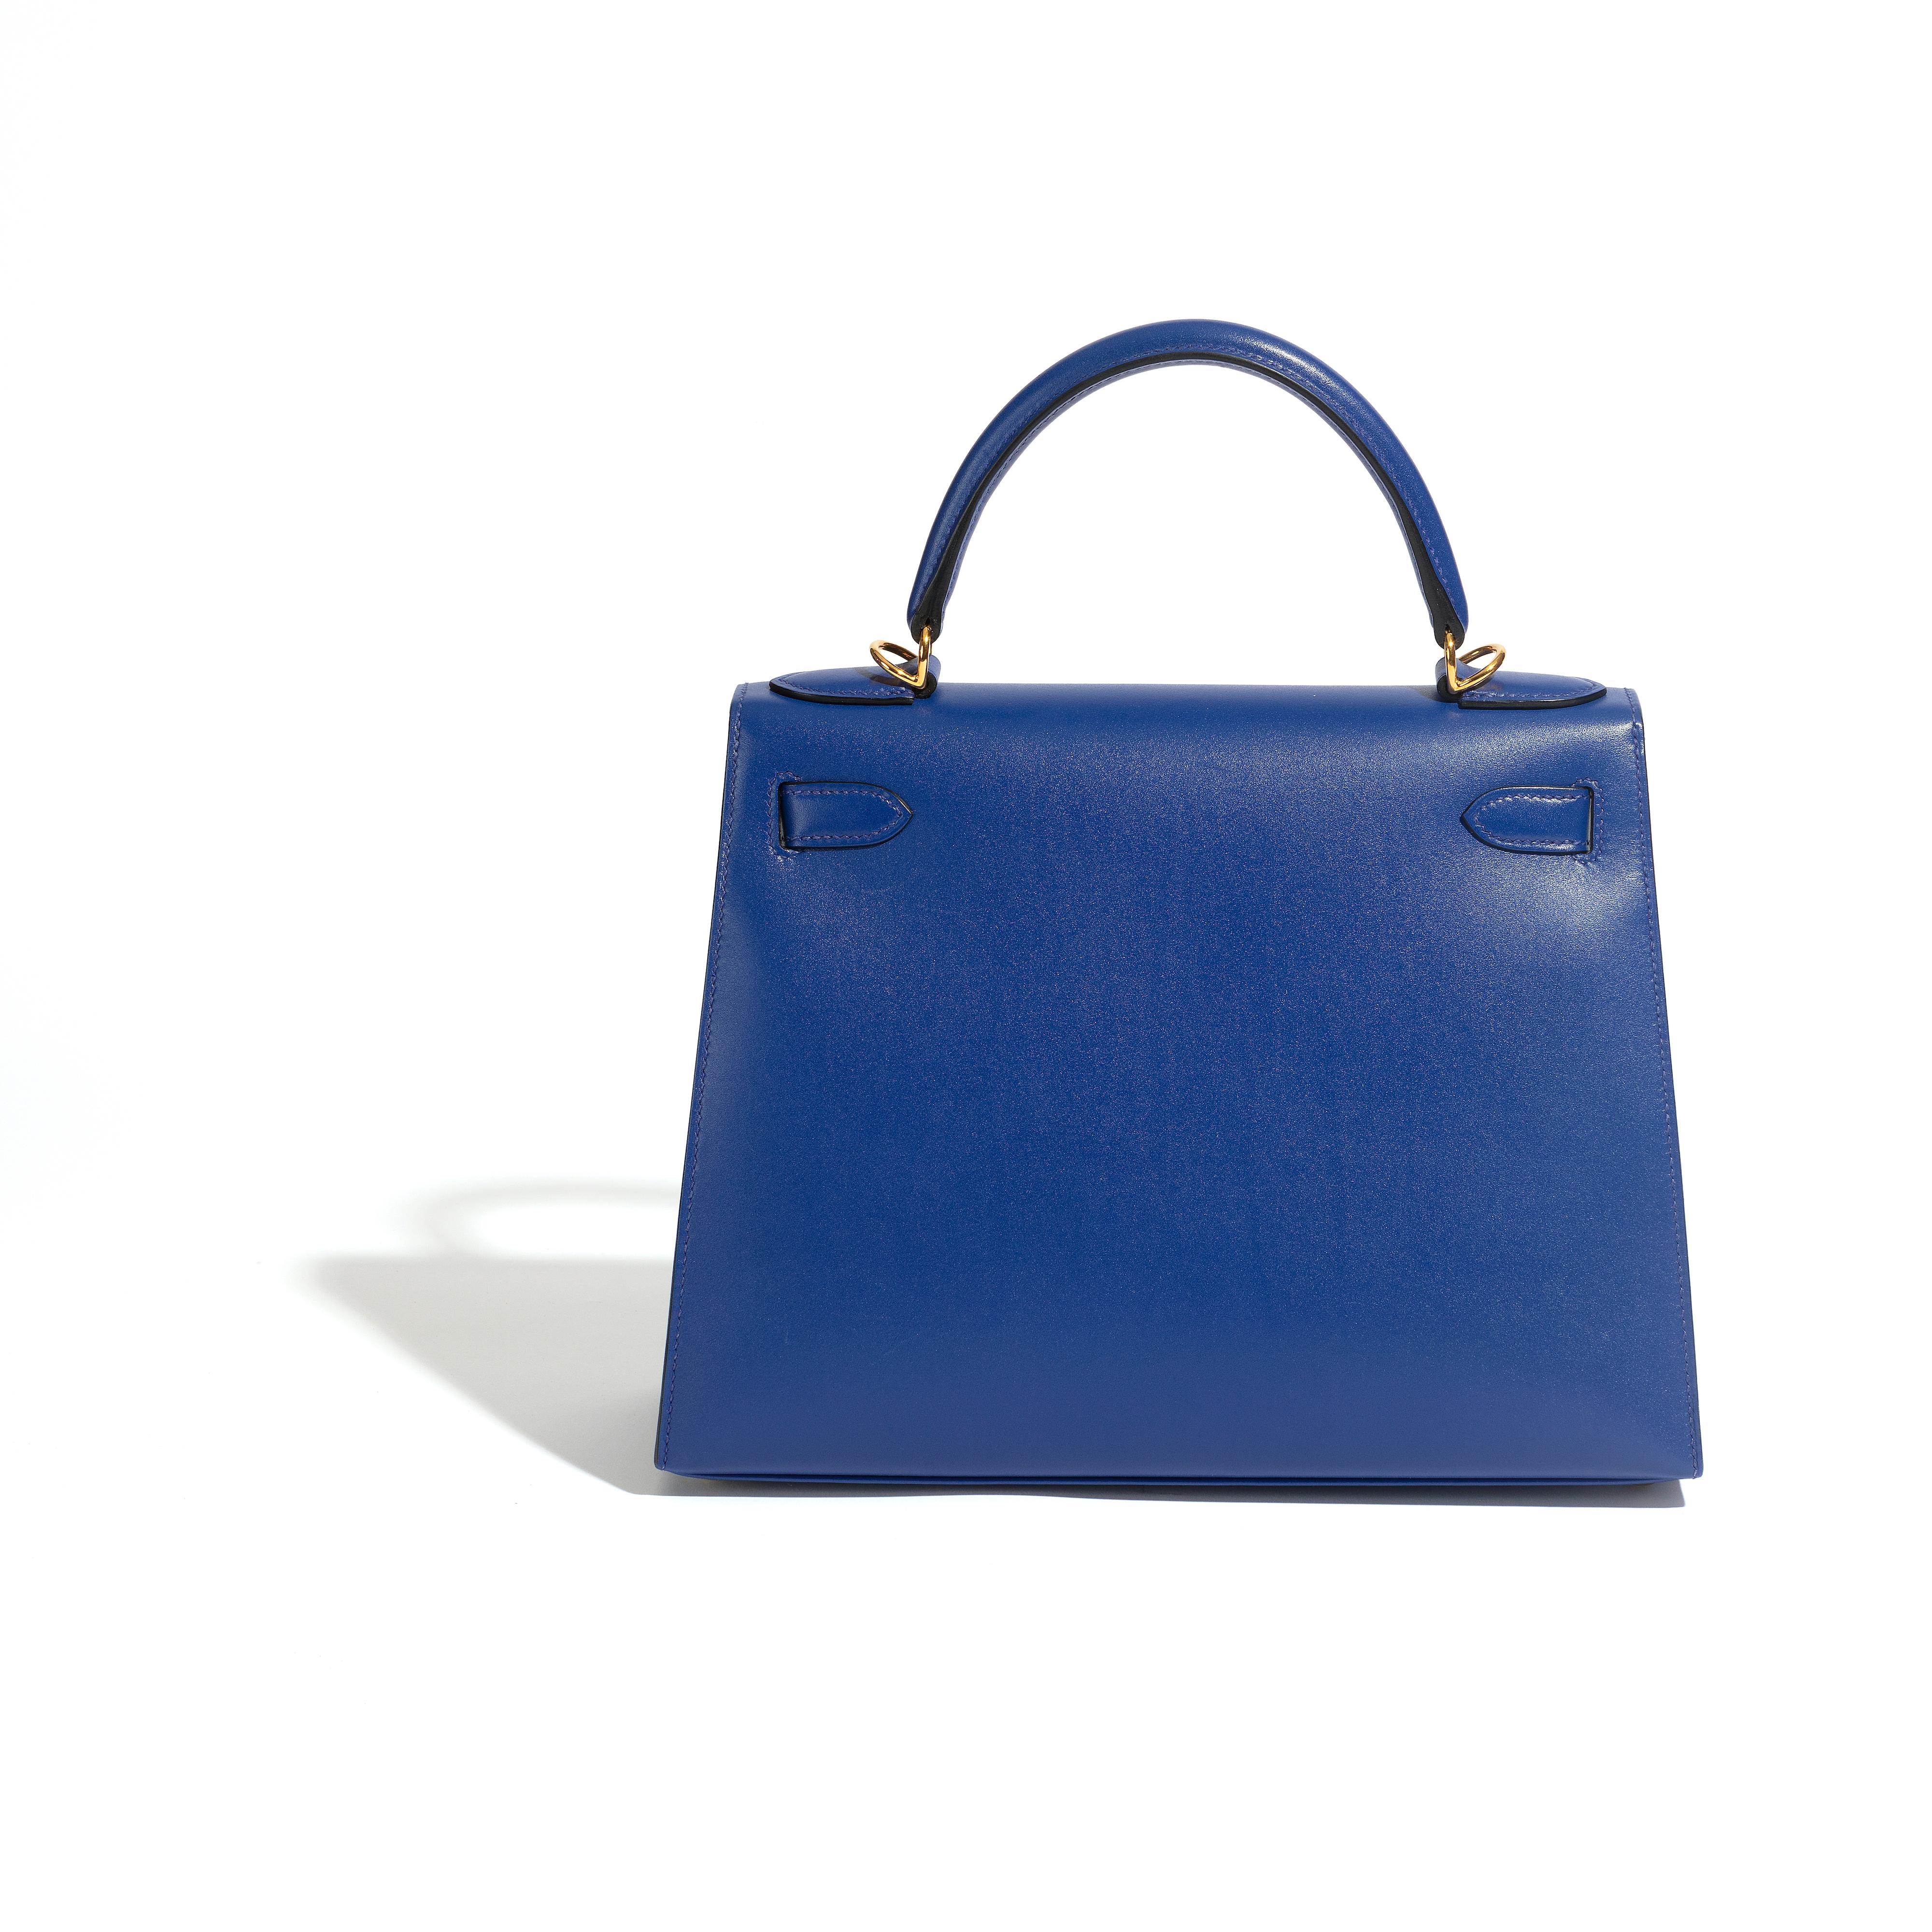 * Hermès Kelly 28cm 
* Bleu Electrique Colour
* Veau Tadelakt Leather 
* Gold-tone hardware
* Sellier shape
* Crafted in 2019, with a 